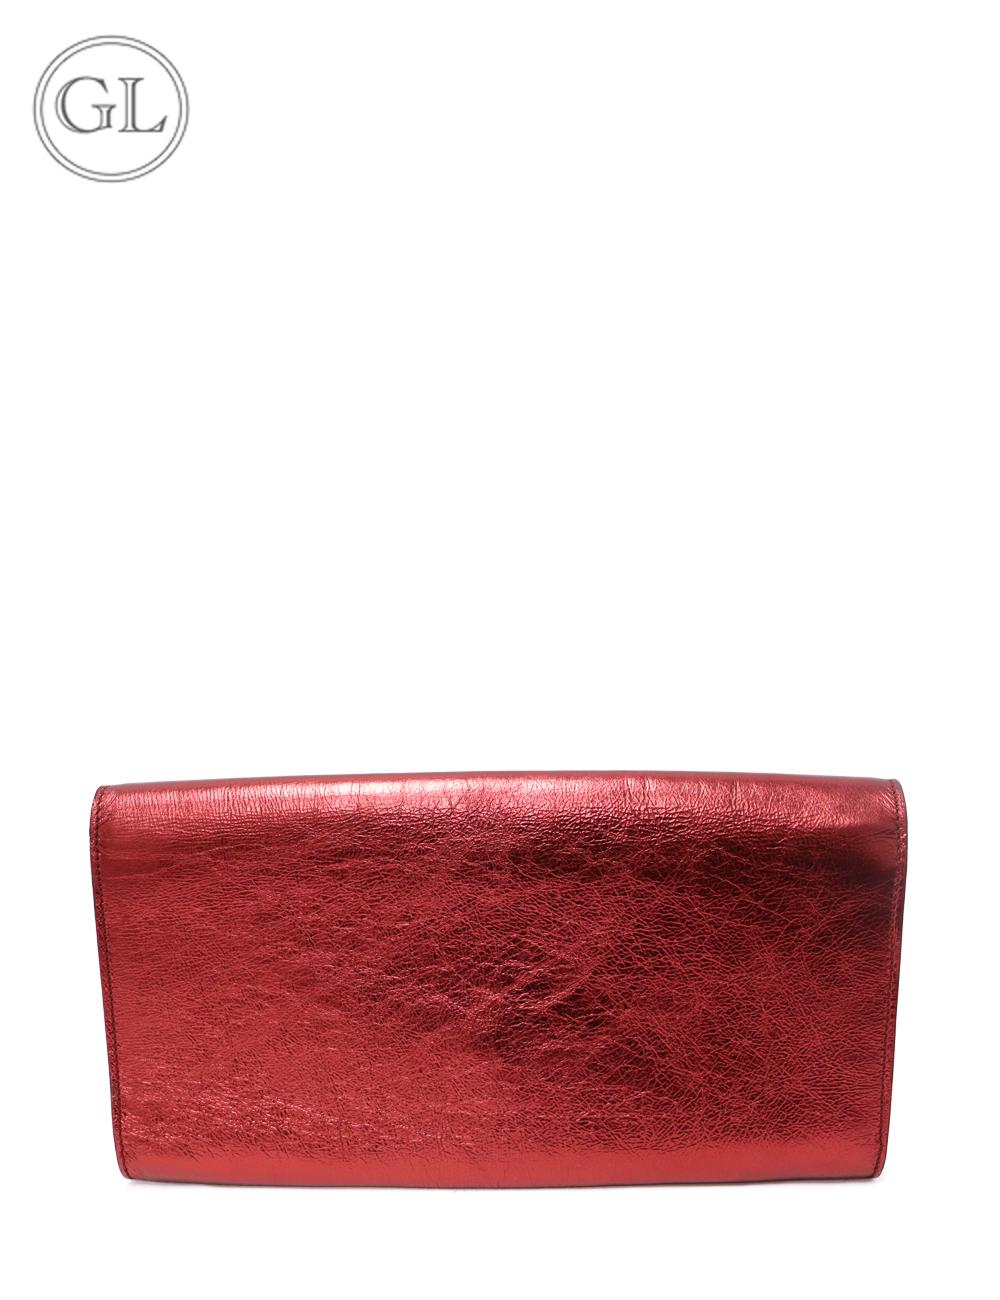 Yves Saint Laurent Metallic Red Leather Belle De Jour Flap Clutch, with a YSL-stitched flap that leads to a satin interior and one slip pocket.

Material: Leather
Measurements:
Height: 13cm
Width: 24cm
Depth: 2cm
Condition: 
Overall condition: